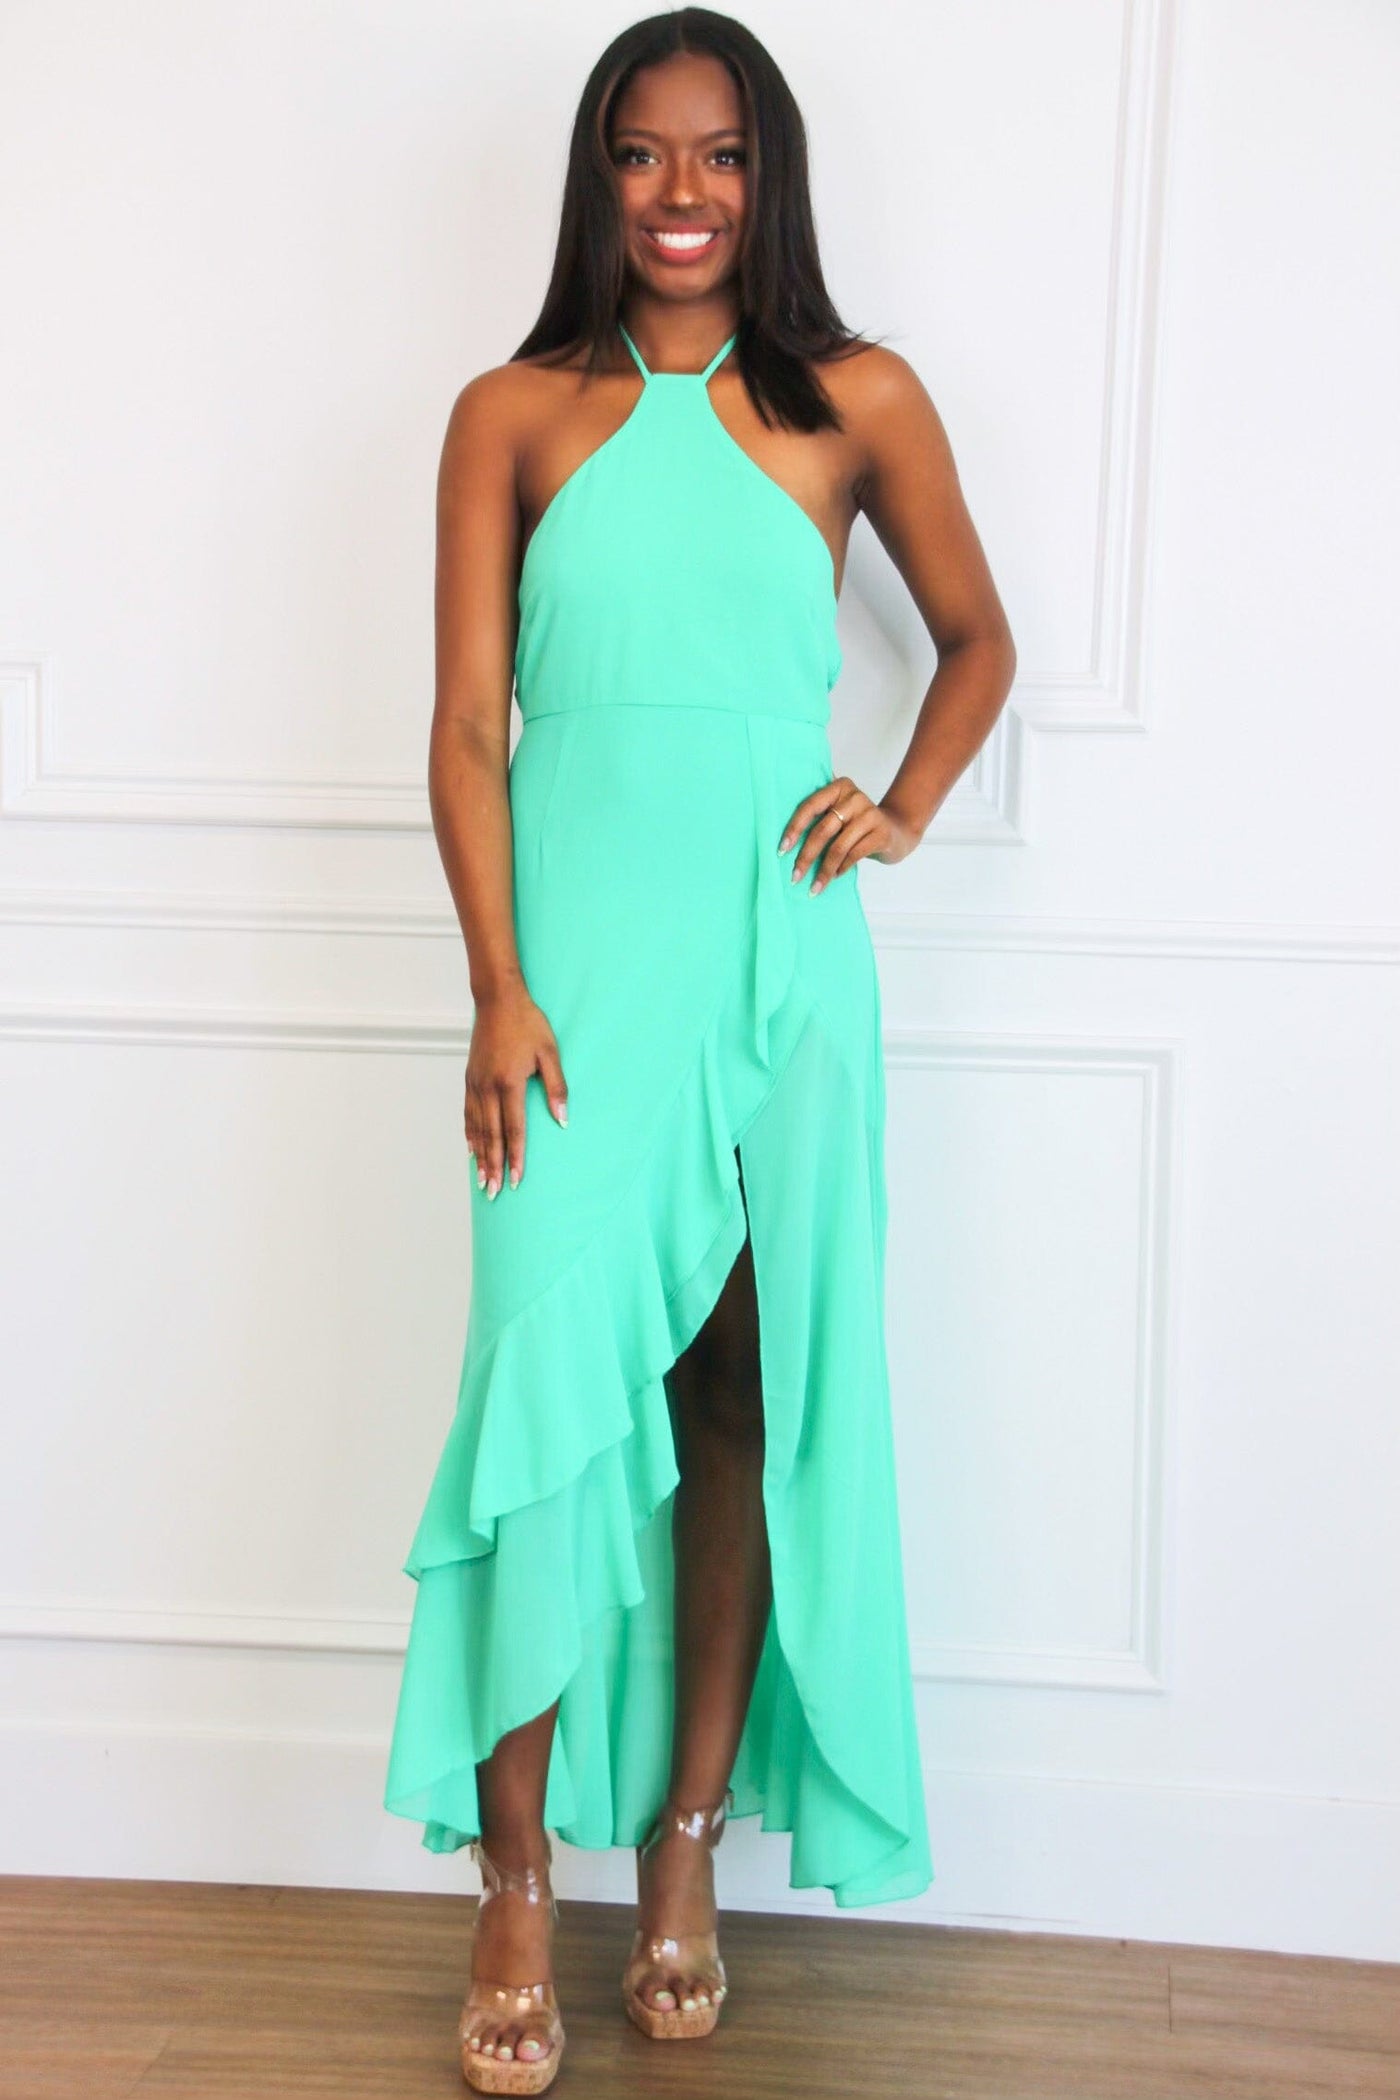 Heather High Neck Ruffle Maxi Dress: Spearmint Green - Bella and Bloom Boutique